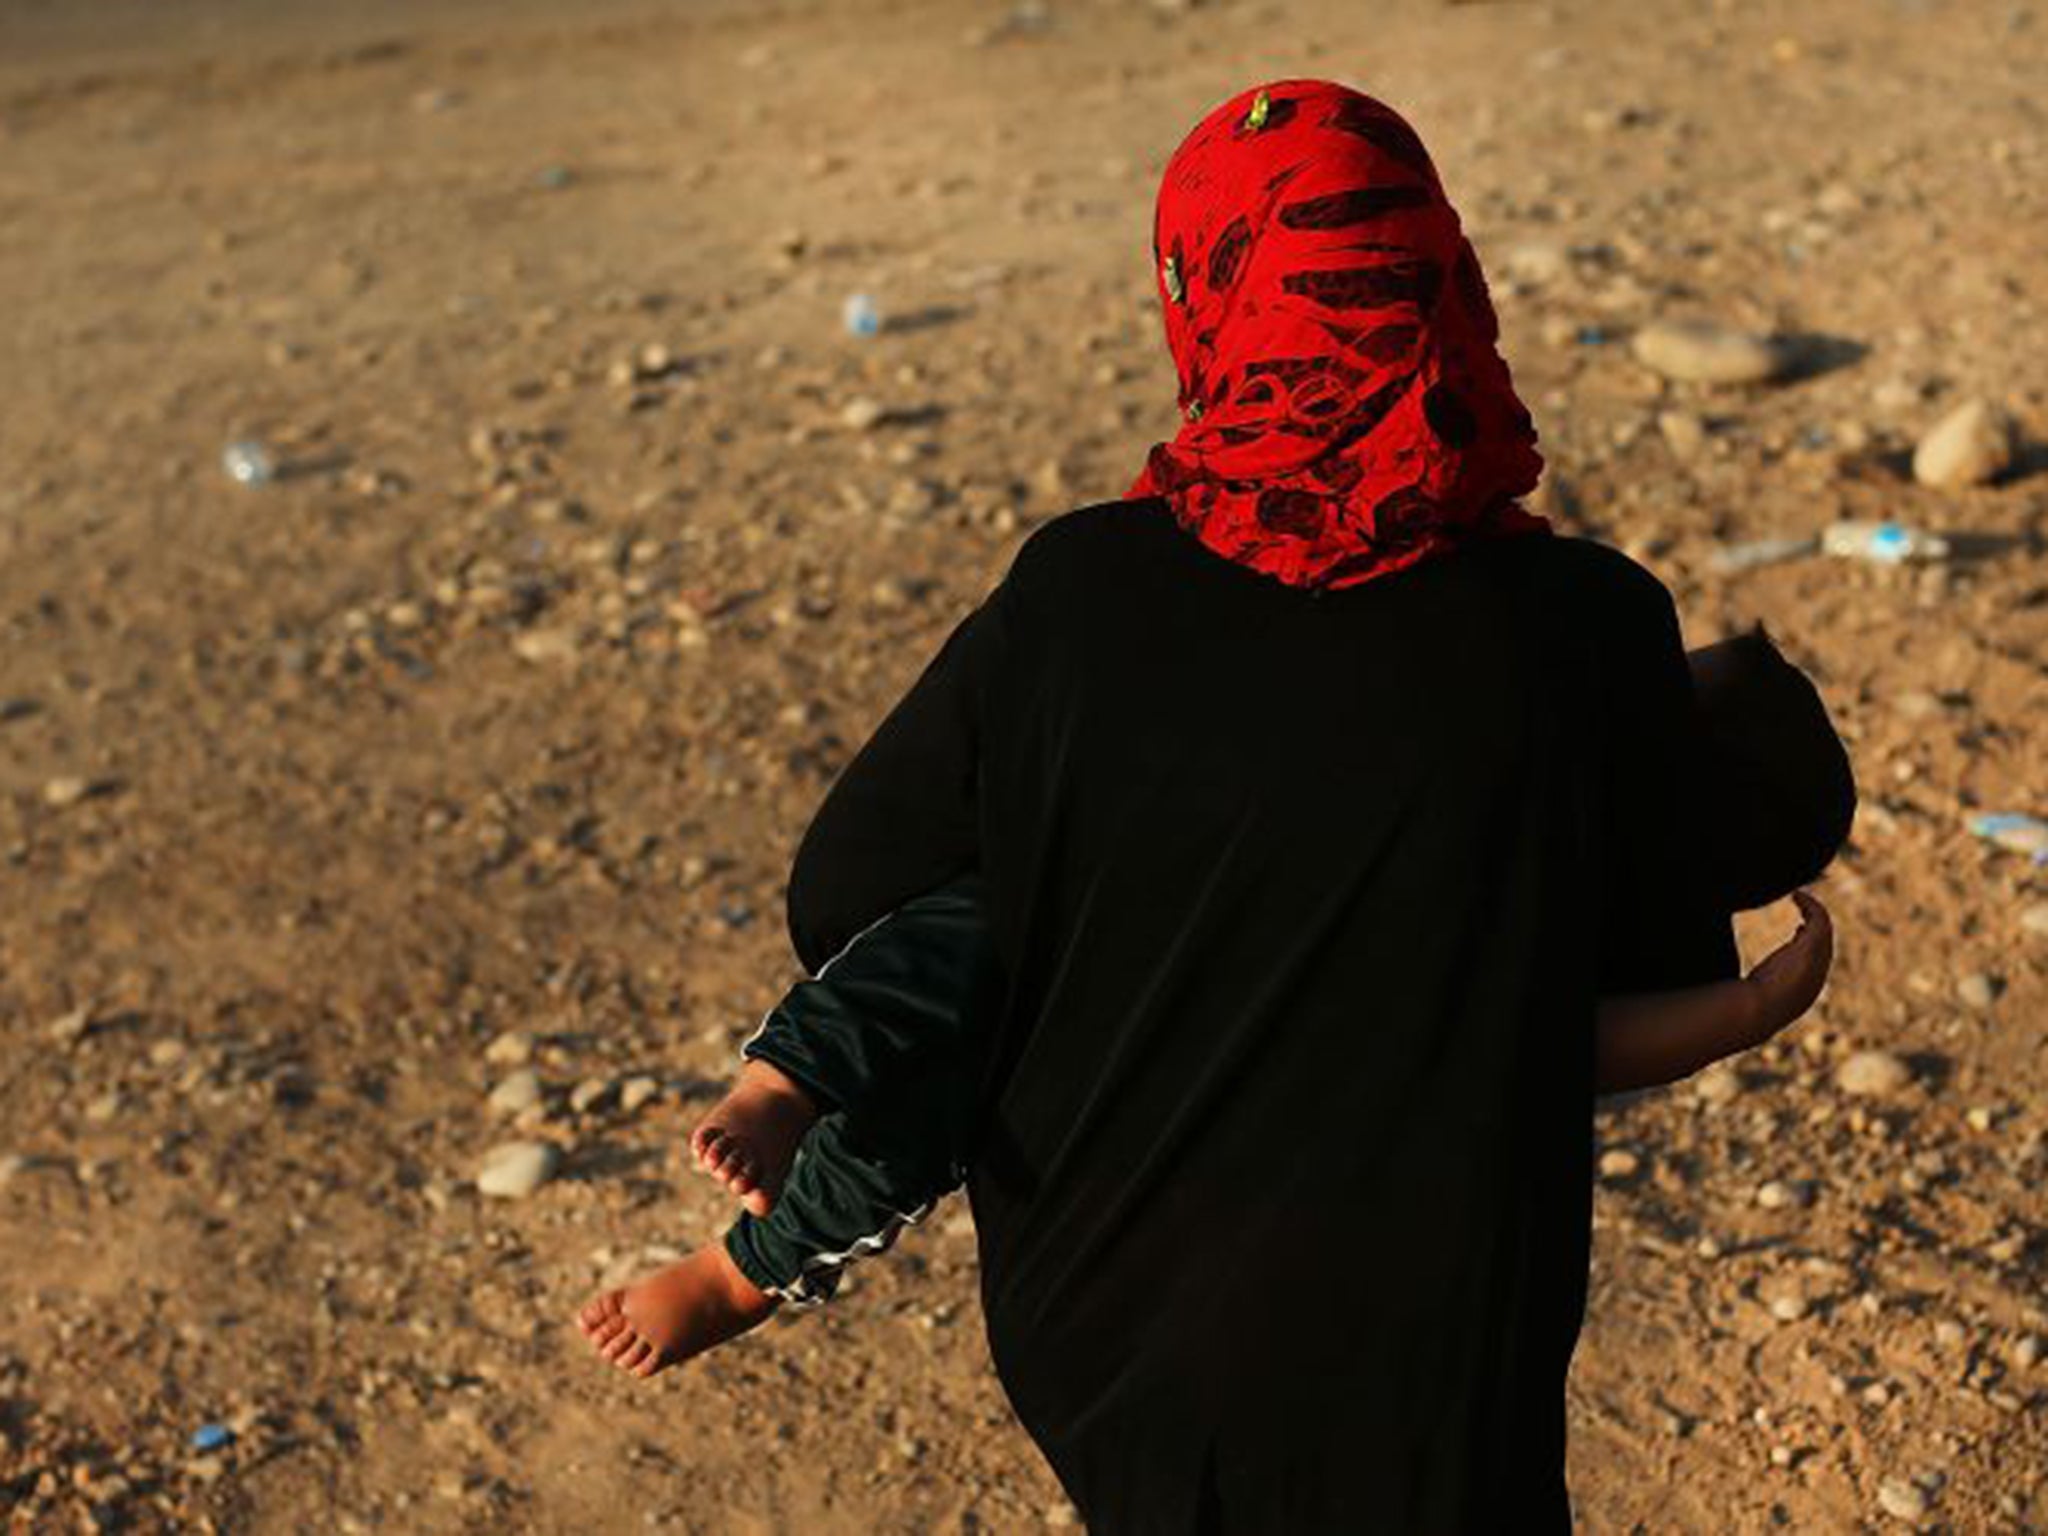 IS militants' extreme version of Sharia is forcing women into ‘marriage’ (AFP)